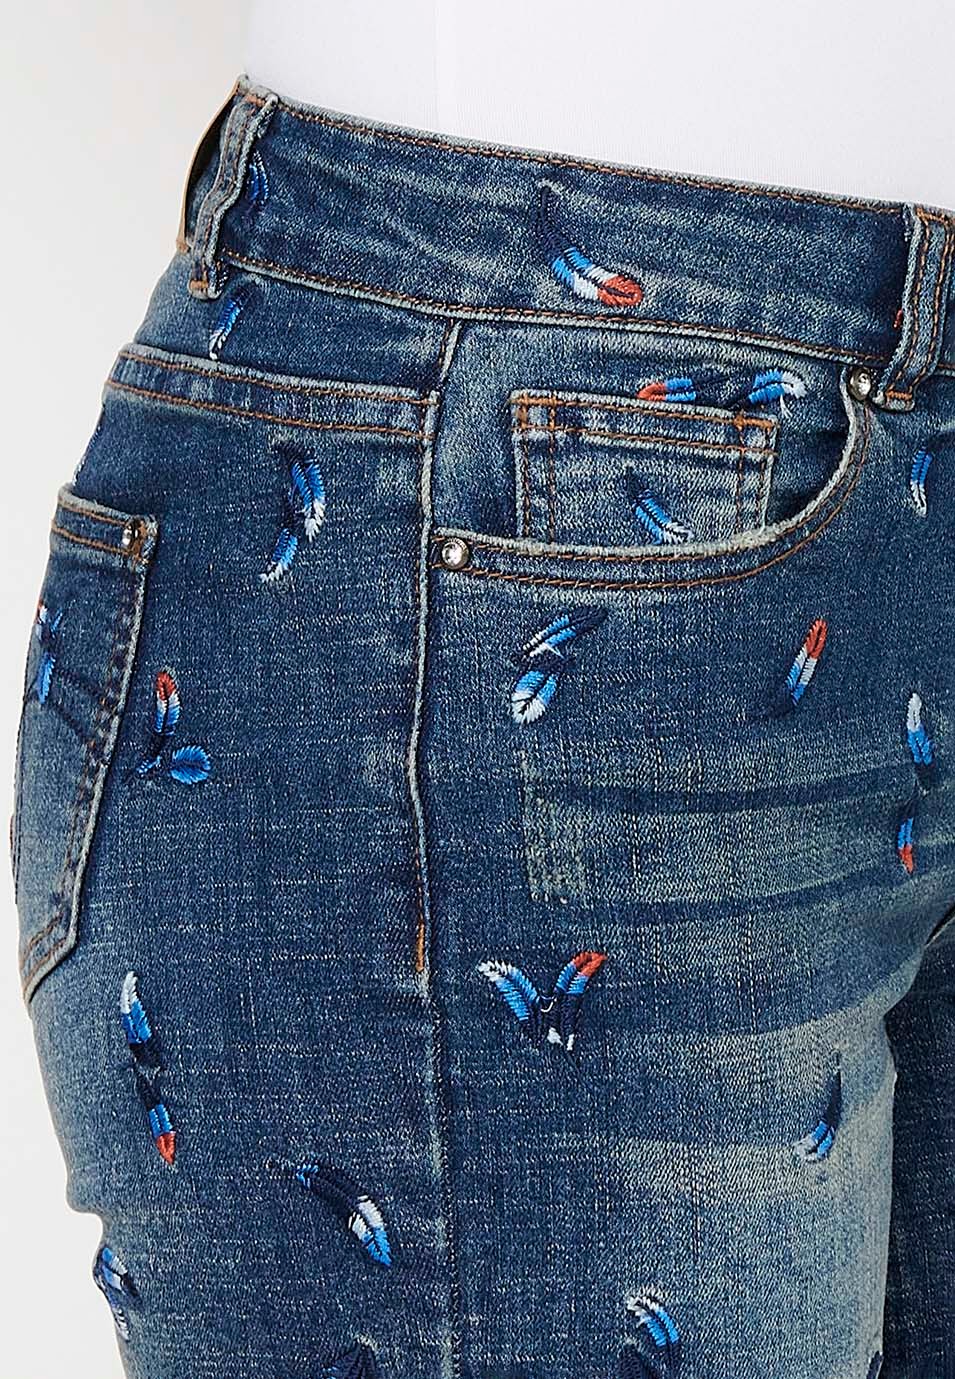 Denim shorts with front zipper and button closure and embroidered fabric with five pockets, one blue pocket pocket for women 5